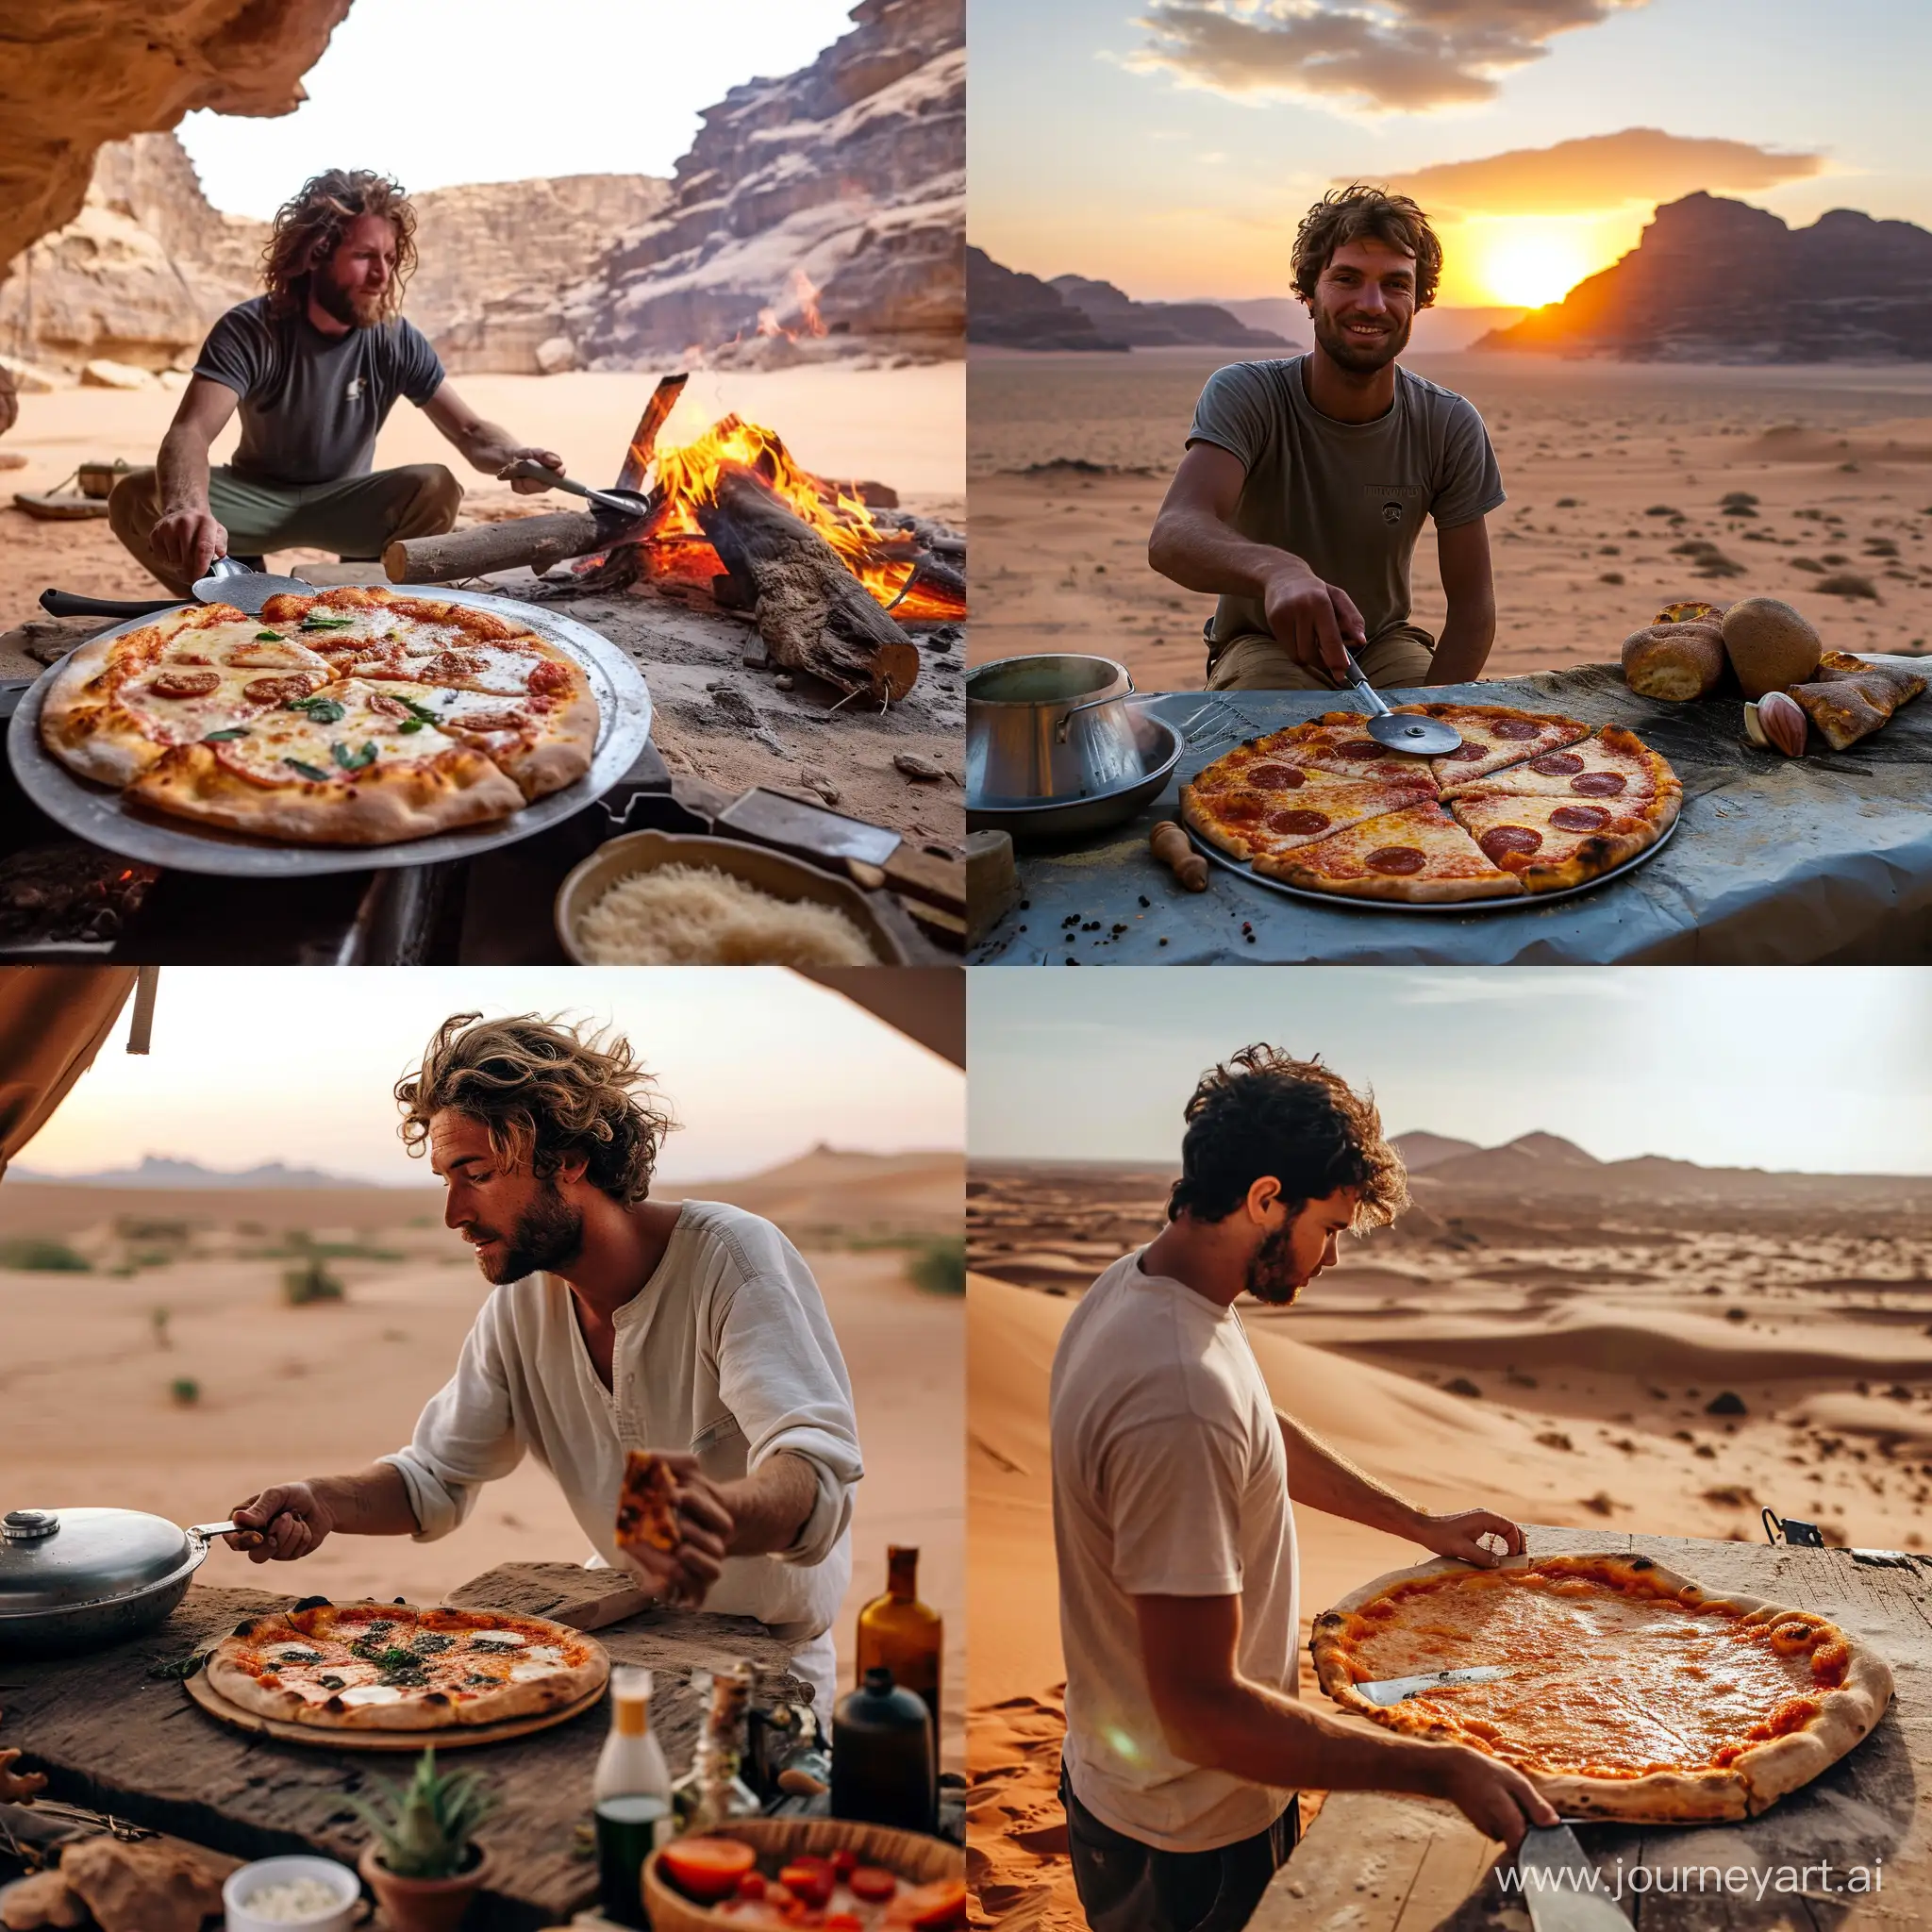 Chef-Bakes-Delicious-Pizza-in-the-Tranquil-Desert-Oasis